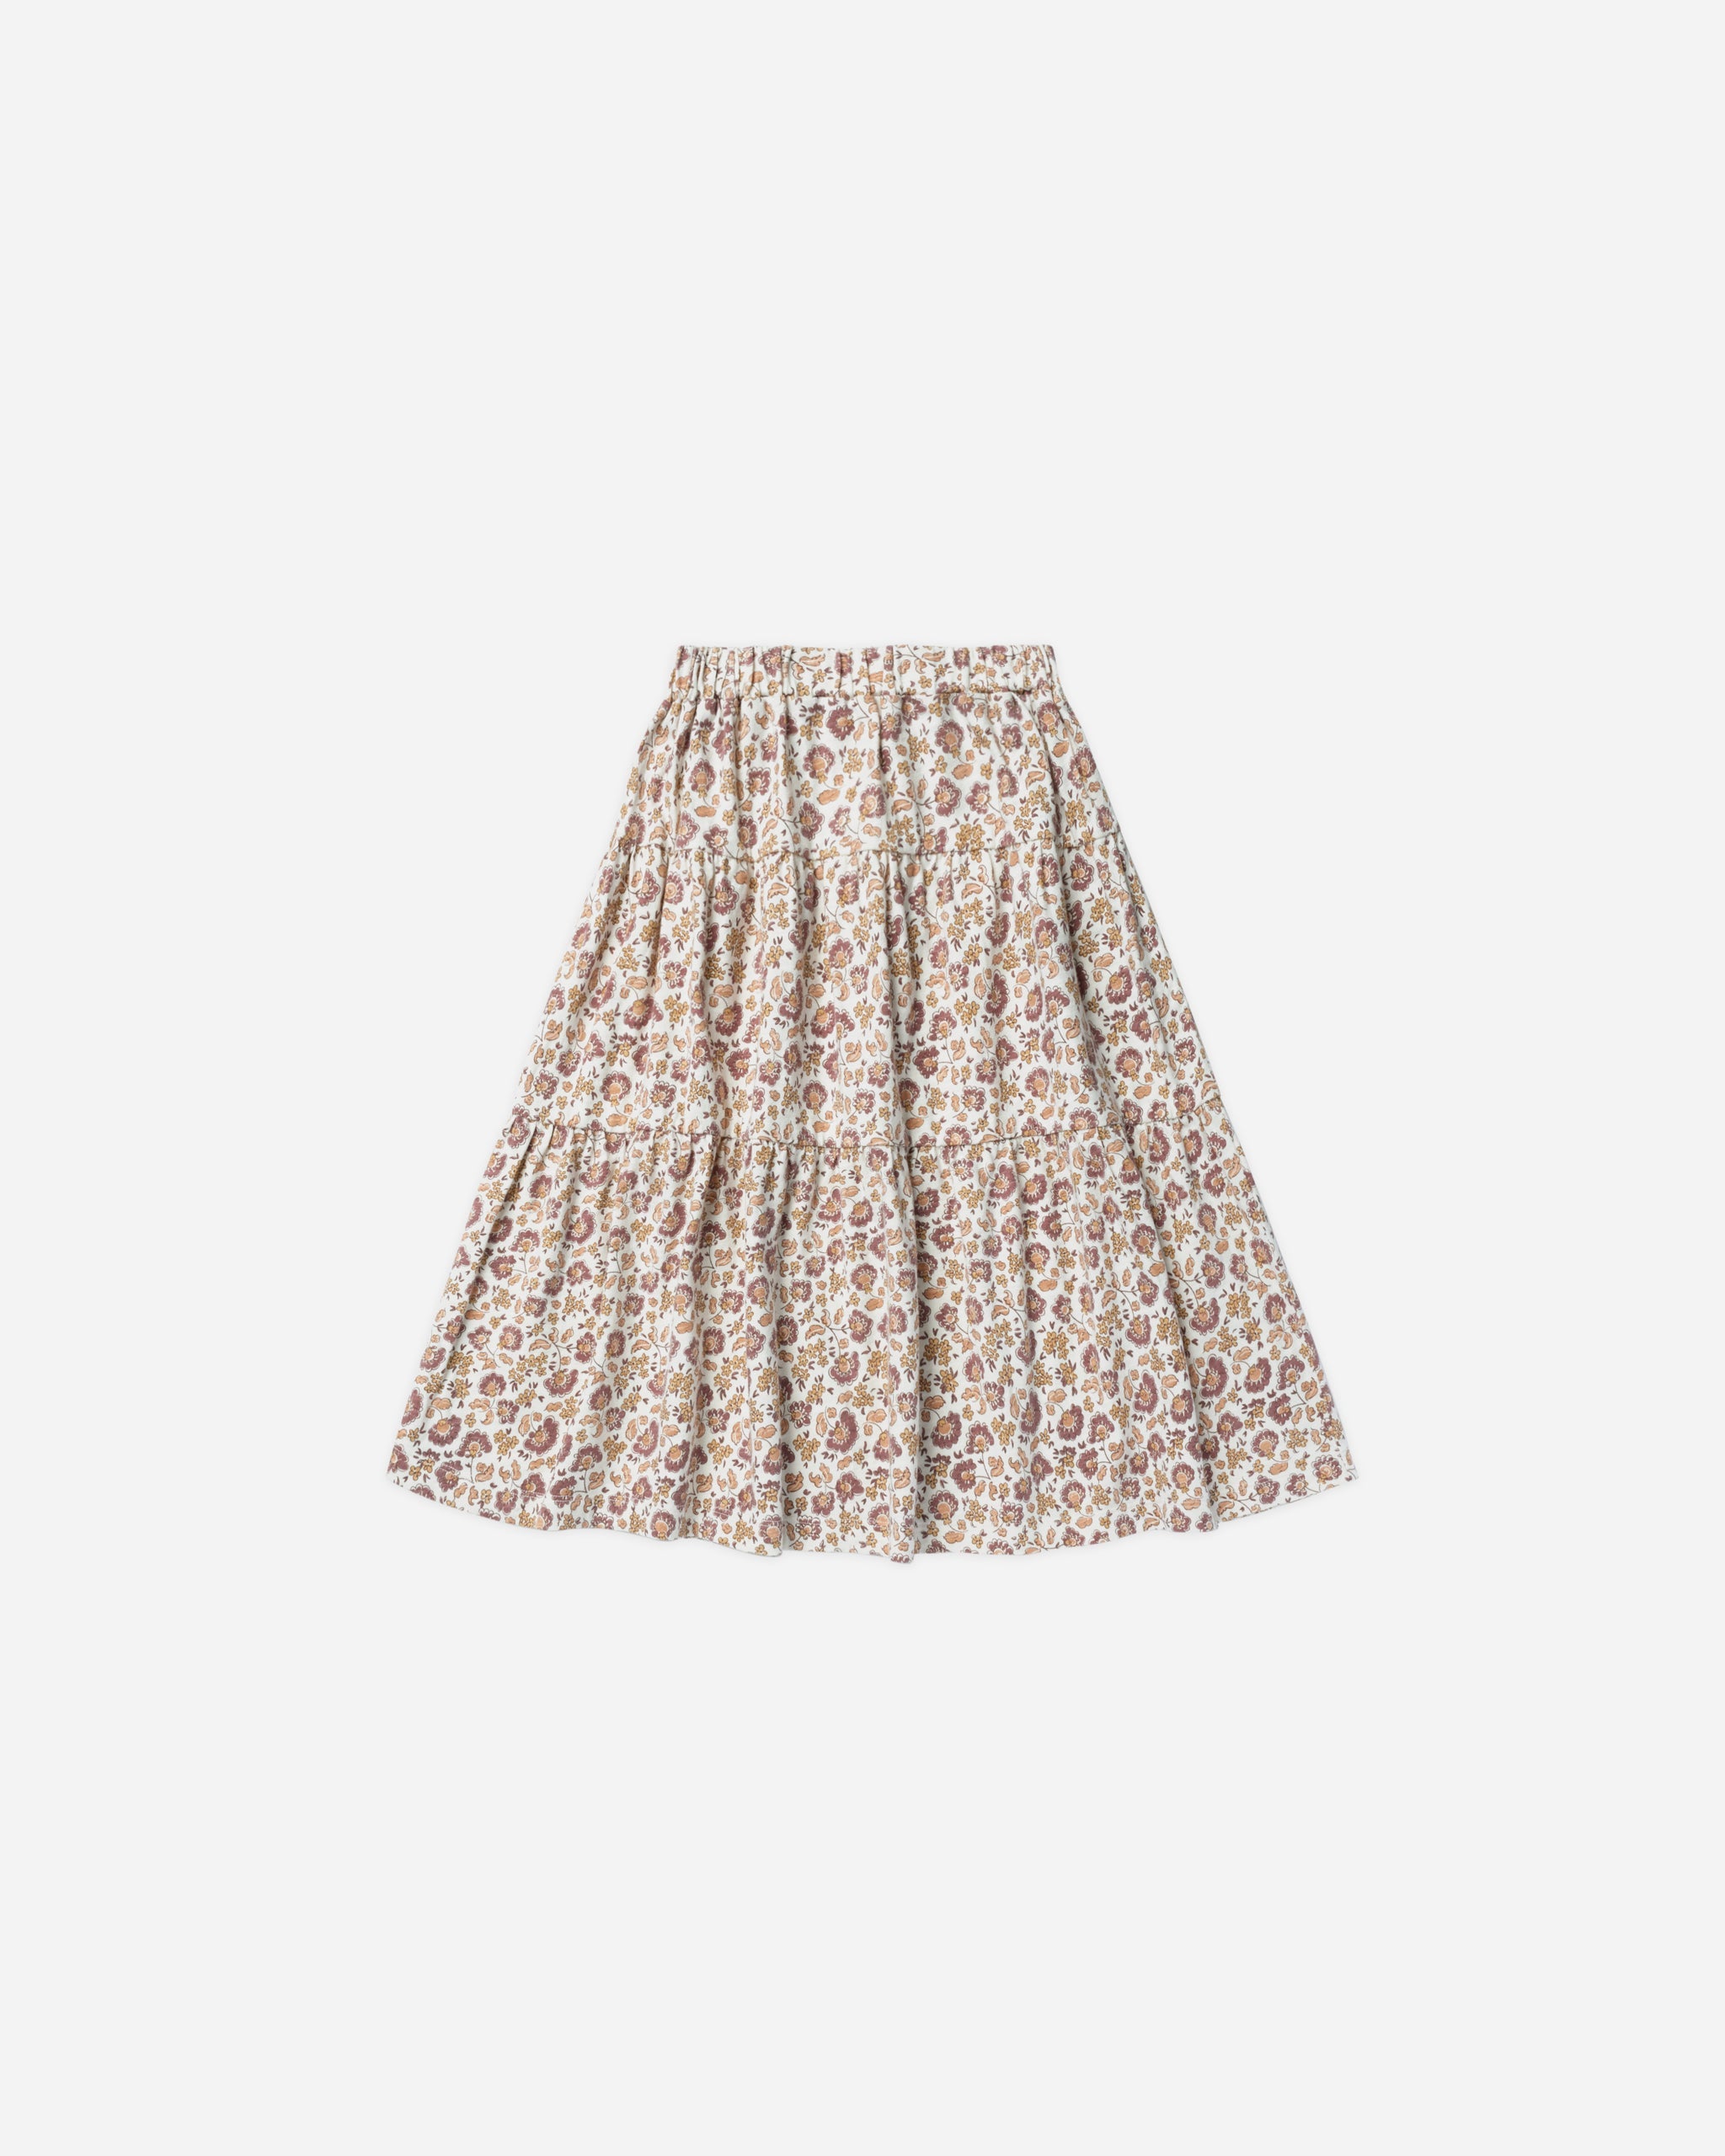 Tiered Midi Skirt || Magnolia - Rylee + Cru | Kids Clothes | Trendy Baby Clothes | Modern Infant Outfits |